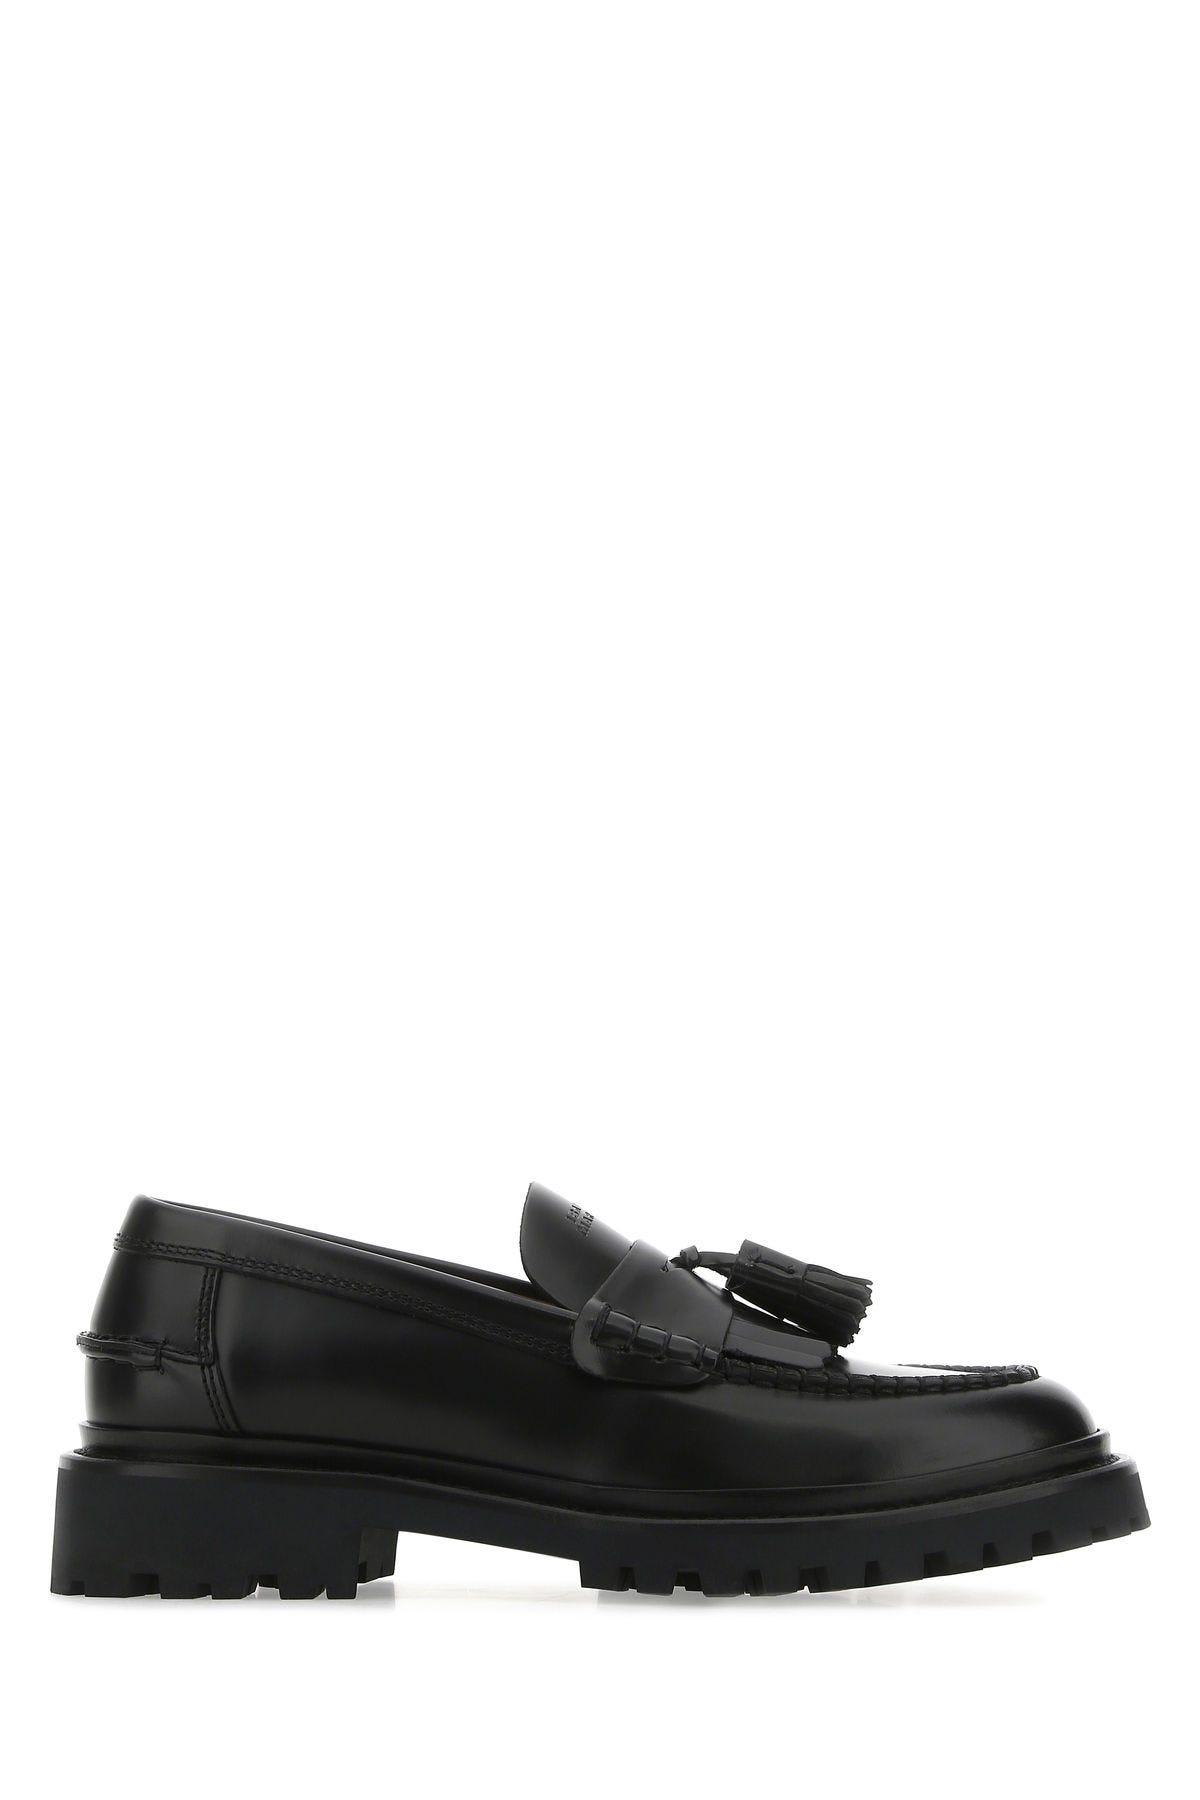 ISABEL MARANT BLACK LEATHER CHUNKY LOAFERS